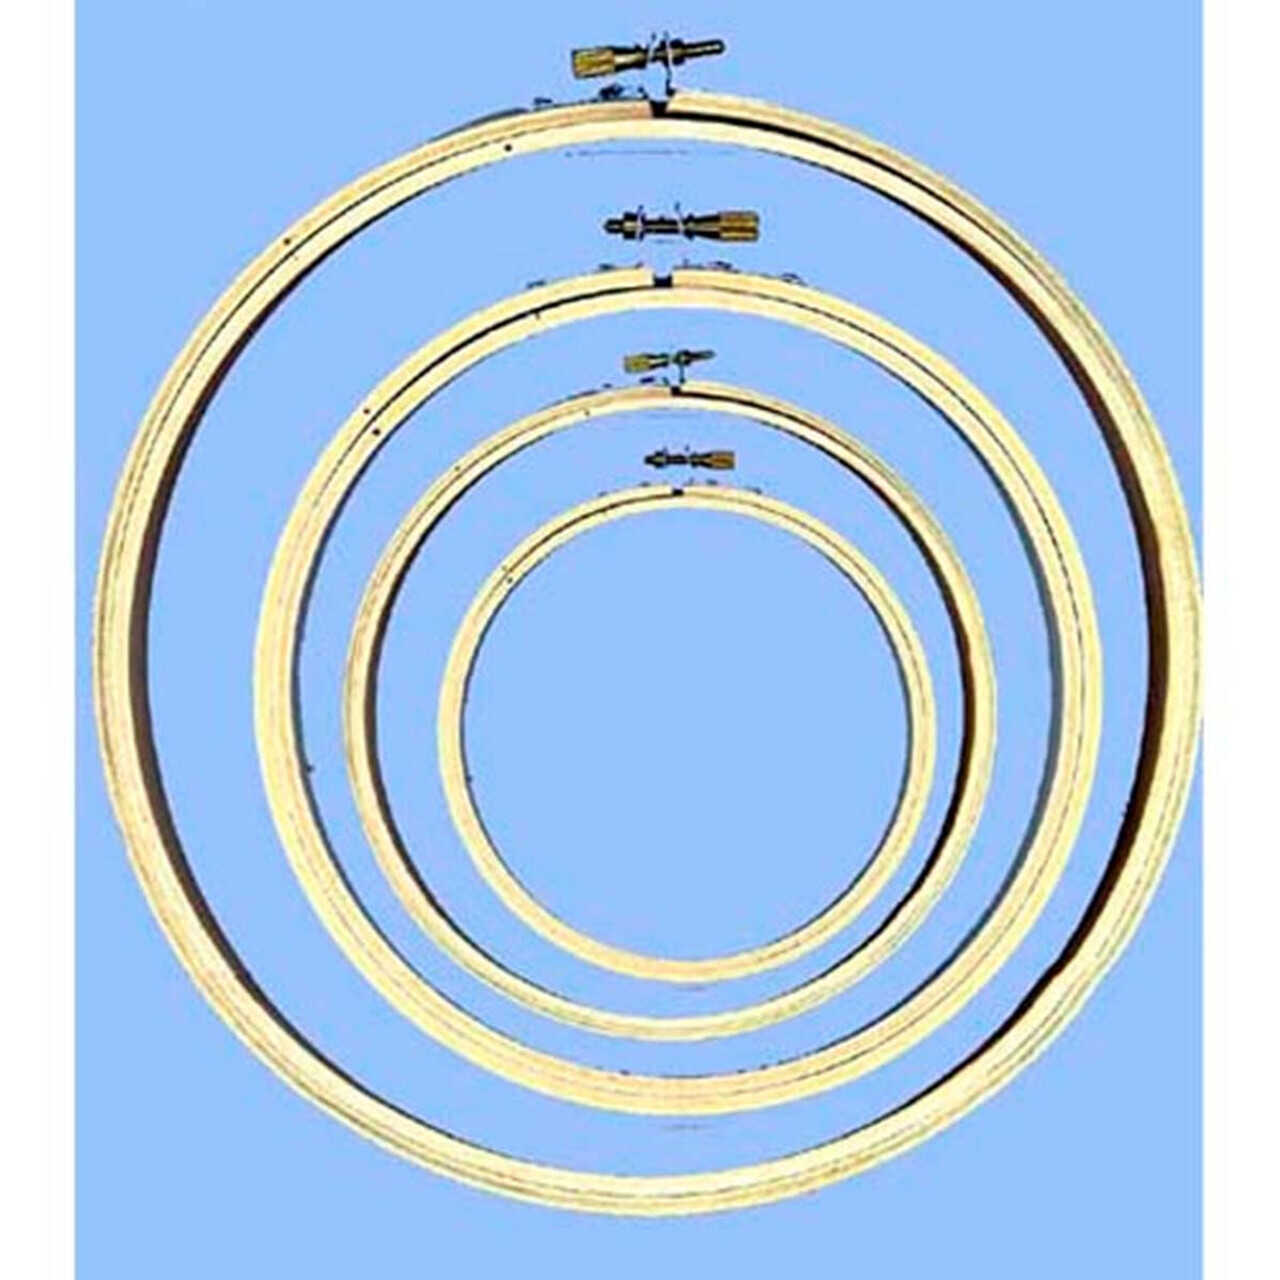 Herrschners Wooden Embroidery Hoops, Set of 3 Accessory